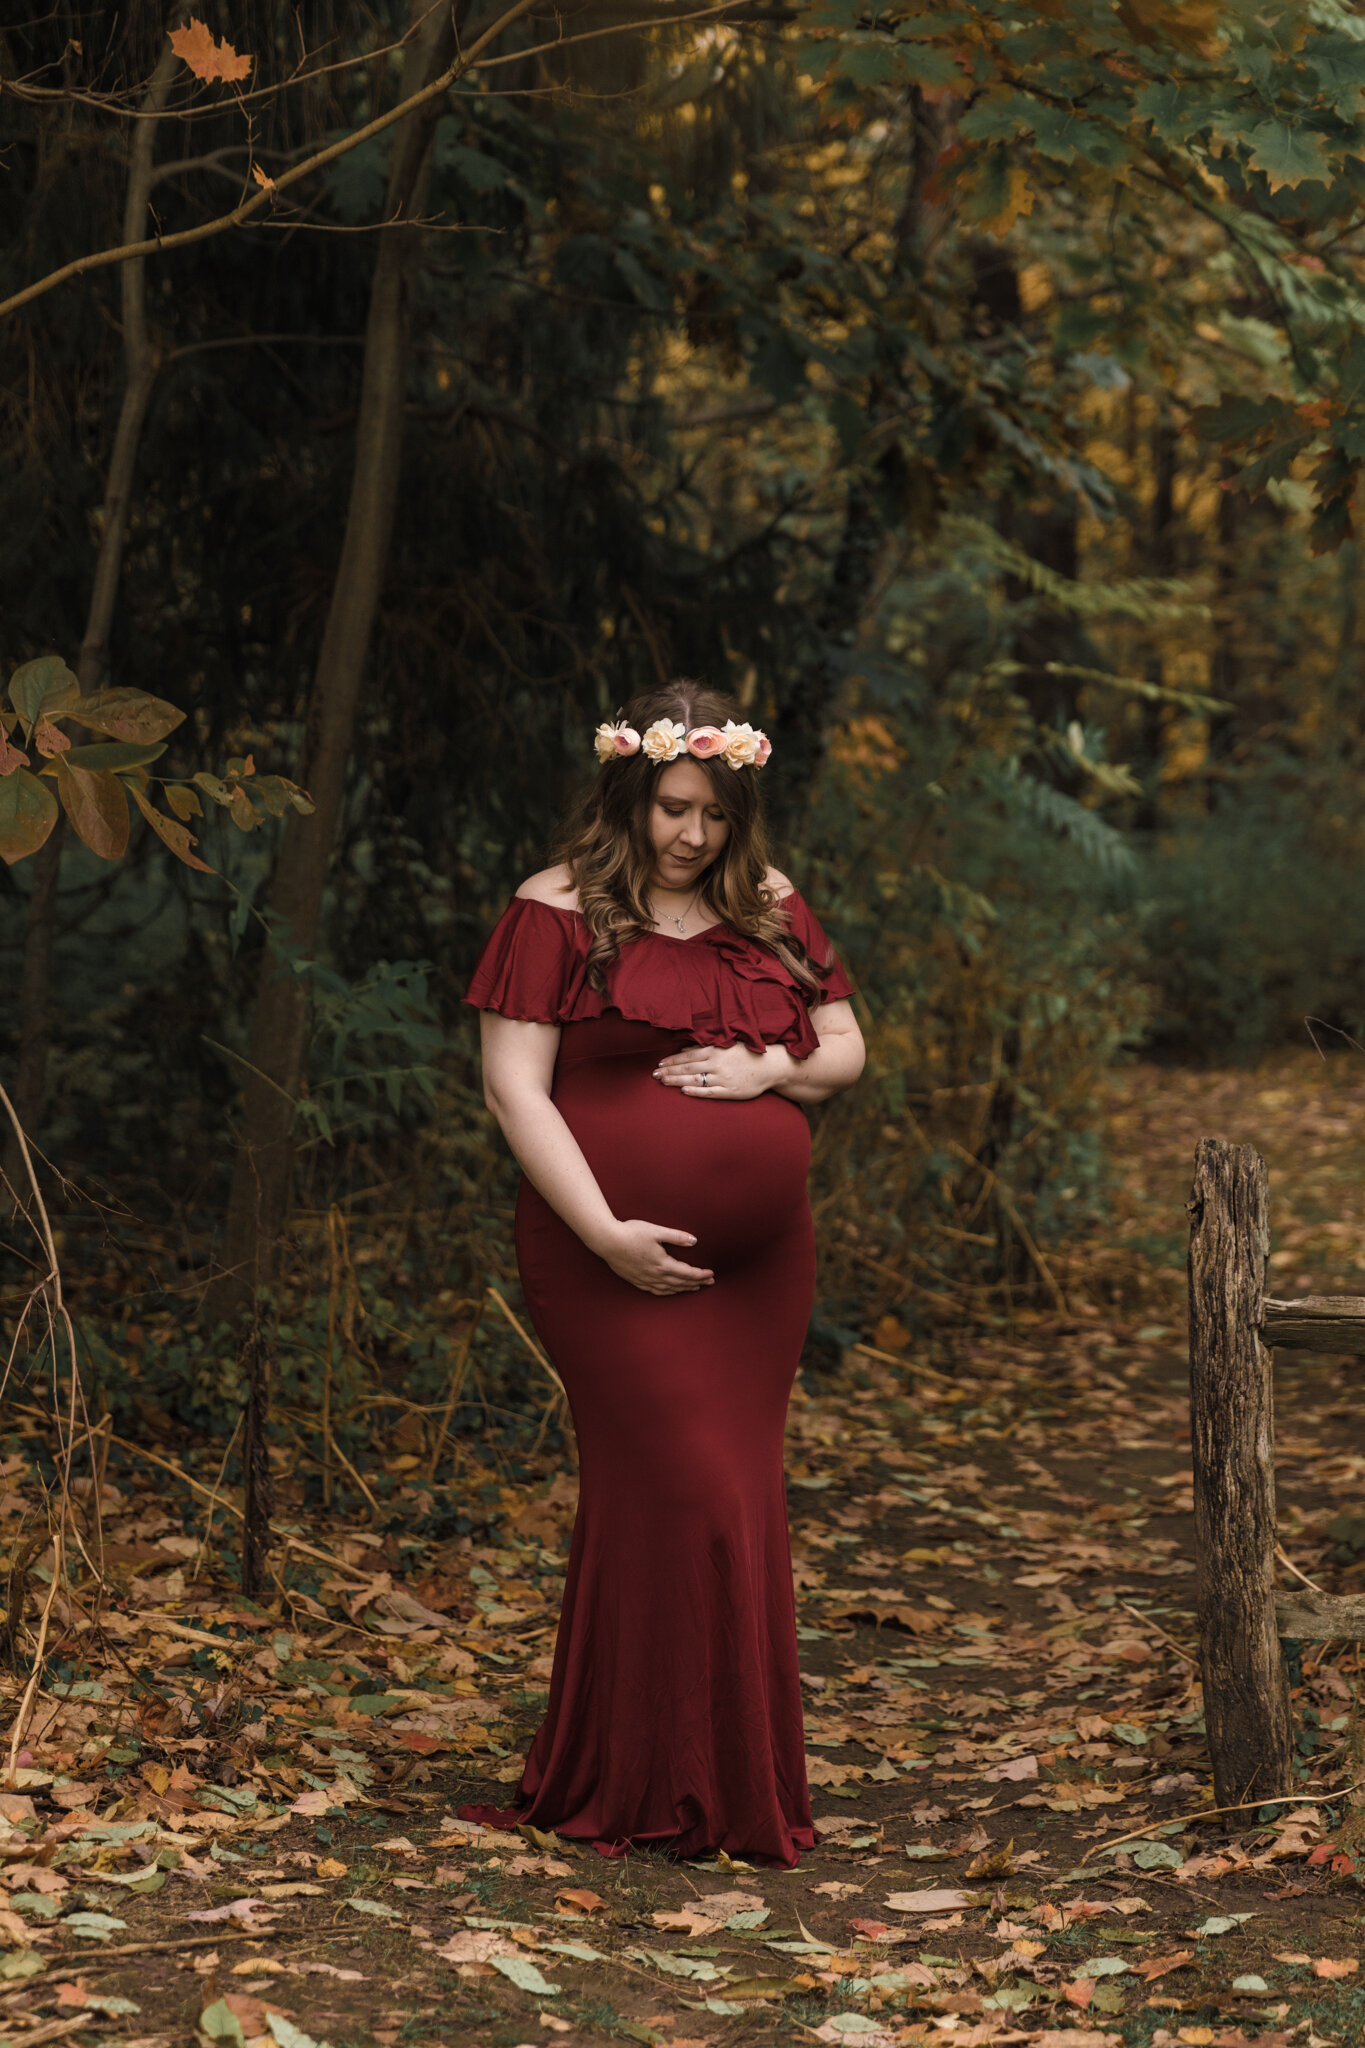 Professional_Maternity_Photography_Lifestyle_Maternity_Session_at_Mill_Creek_Metro_Parks_Rose_Garden_Youngstown_Ohio_by_Newborn_and_Maternity_Photographer_Christie_Leigh_Photo-2.JPG